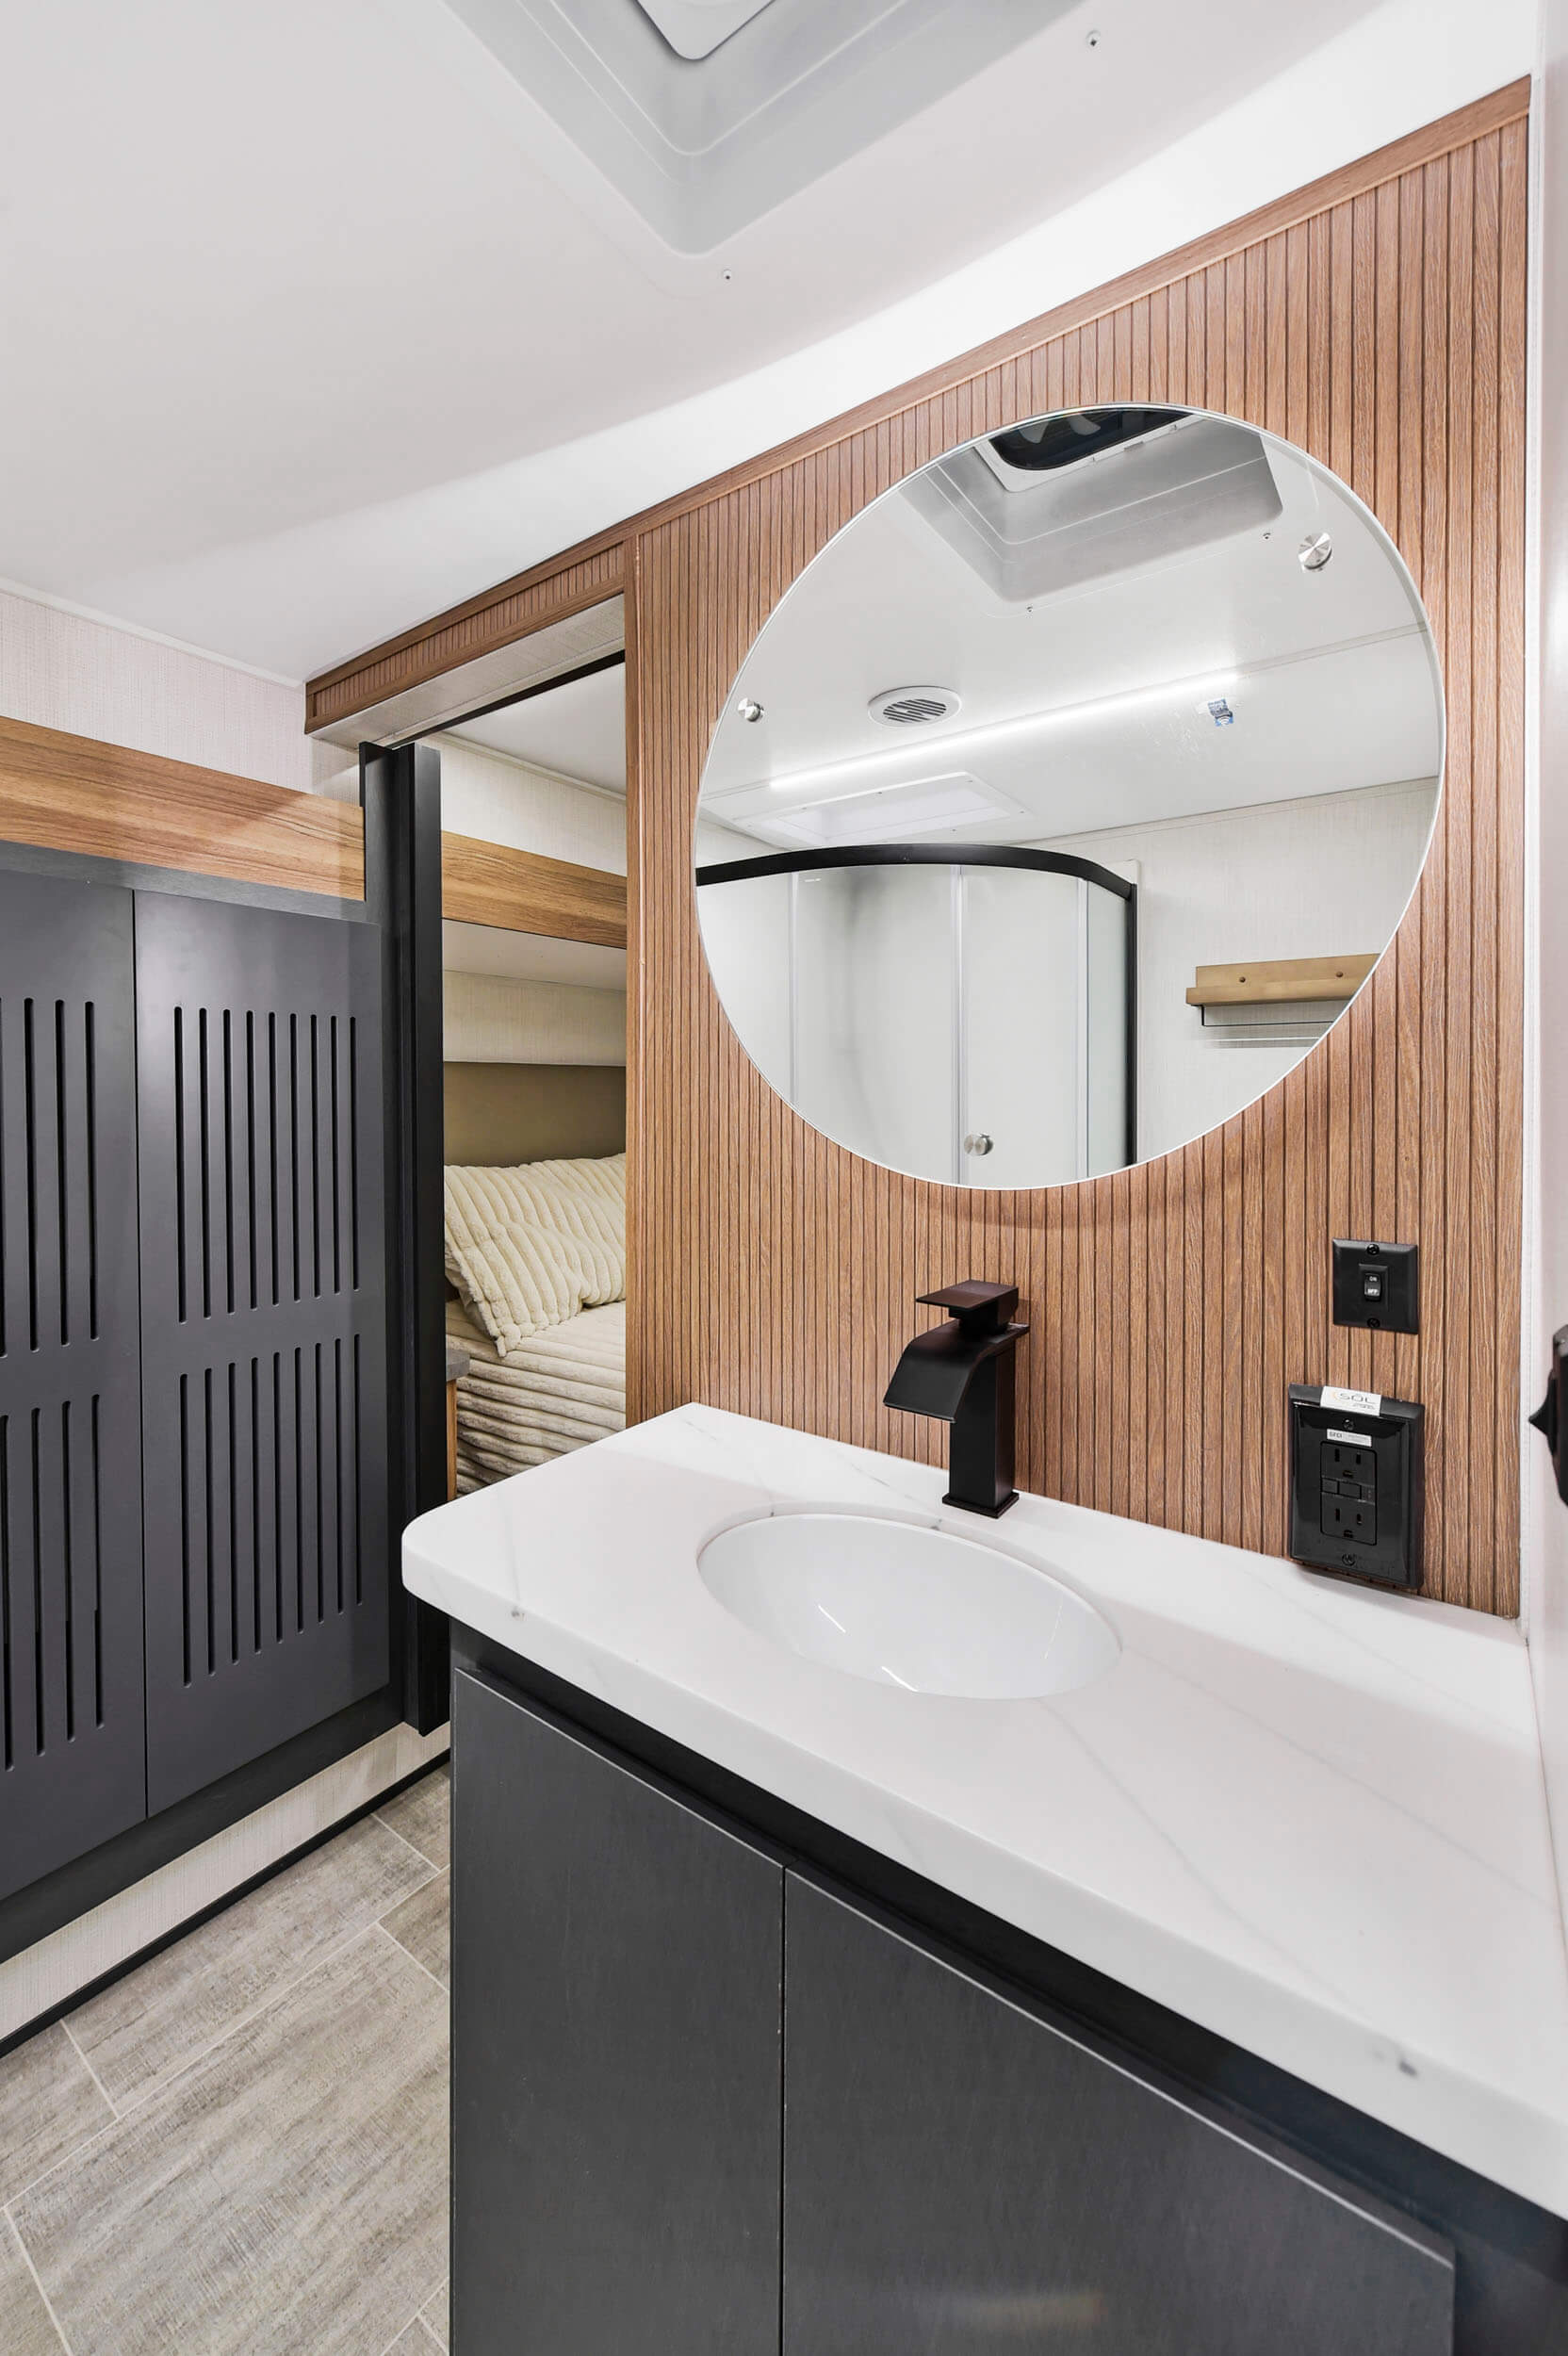 A bathroom with styling fit for a 5-star hotel